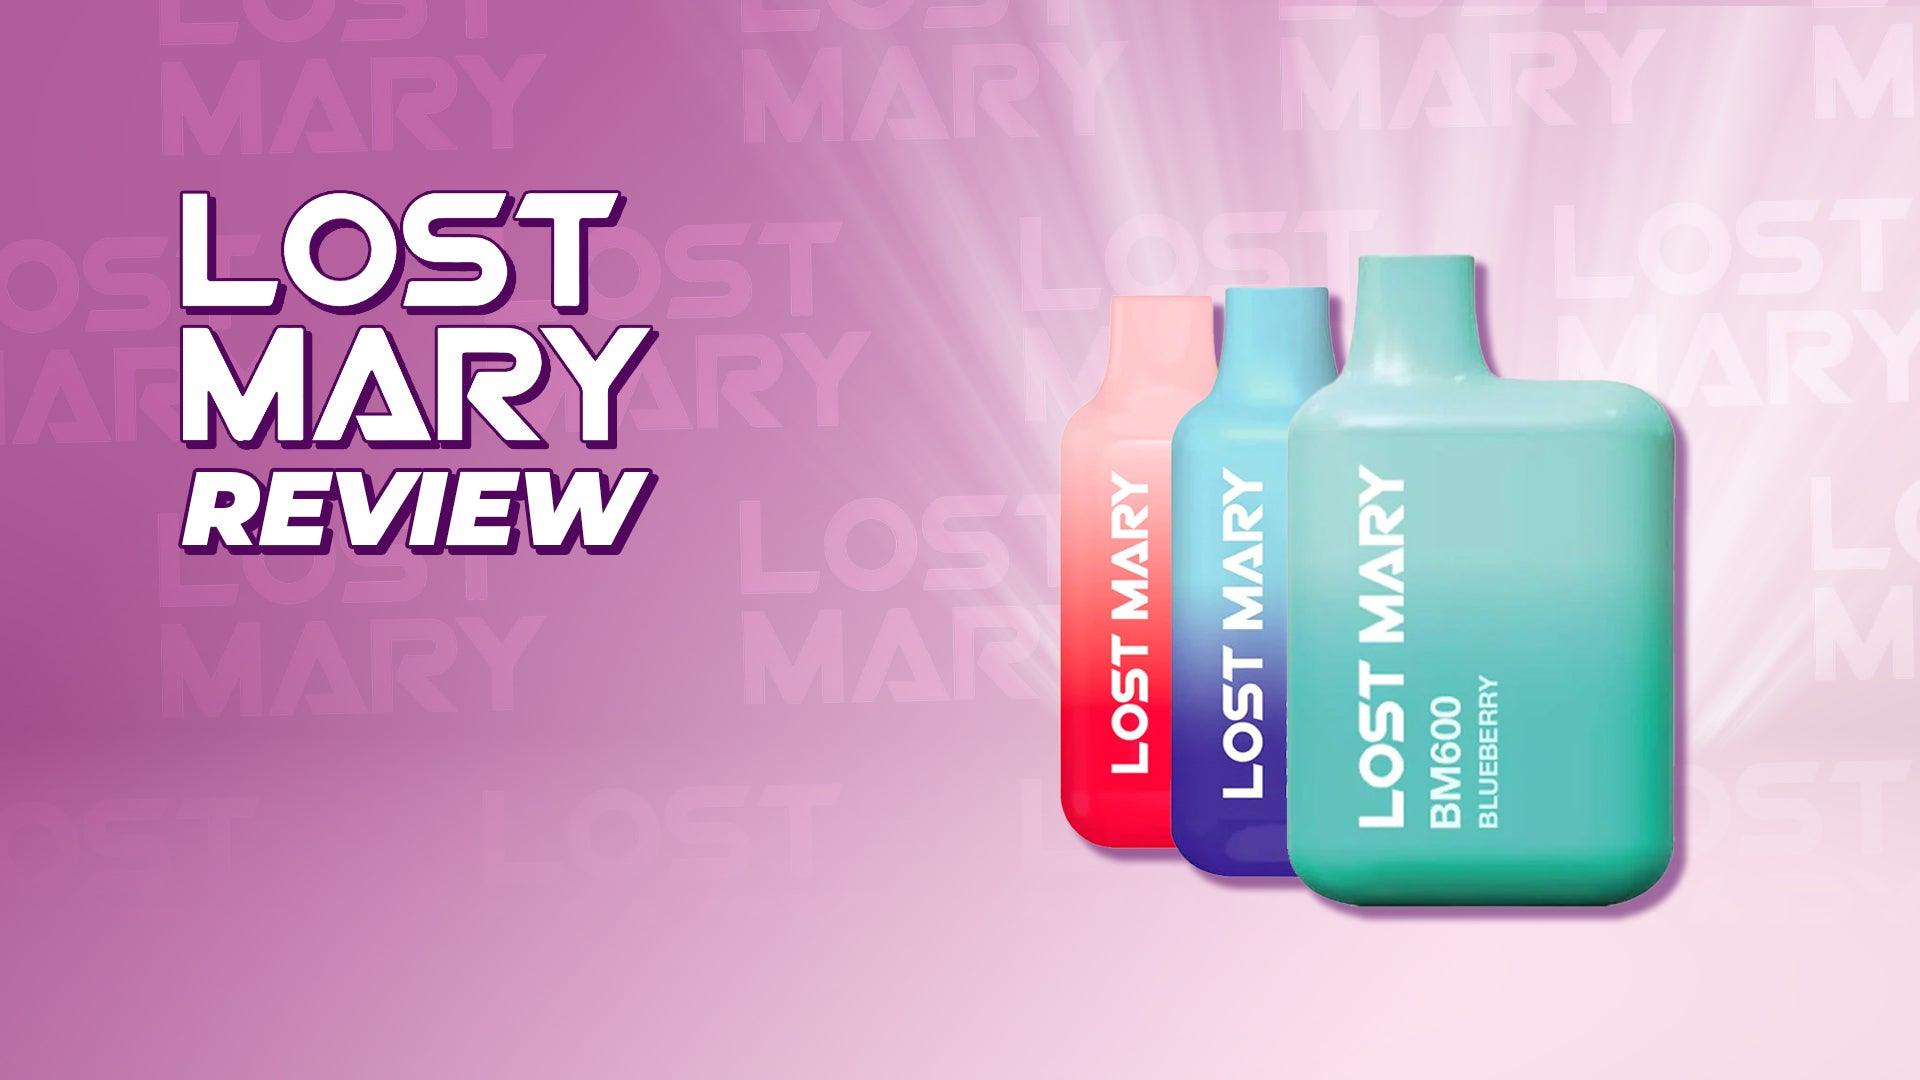 Lost Mary BM600 Review - Brand:Lost Mary, Category:Vape Kits, Sub Category:Disposables